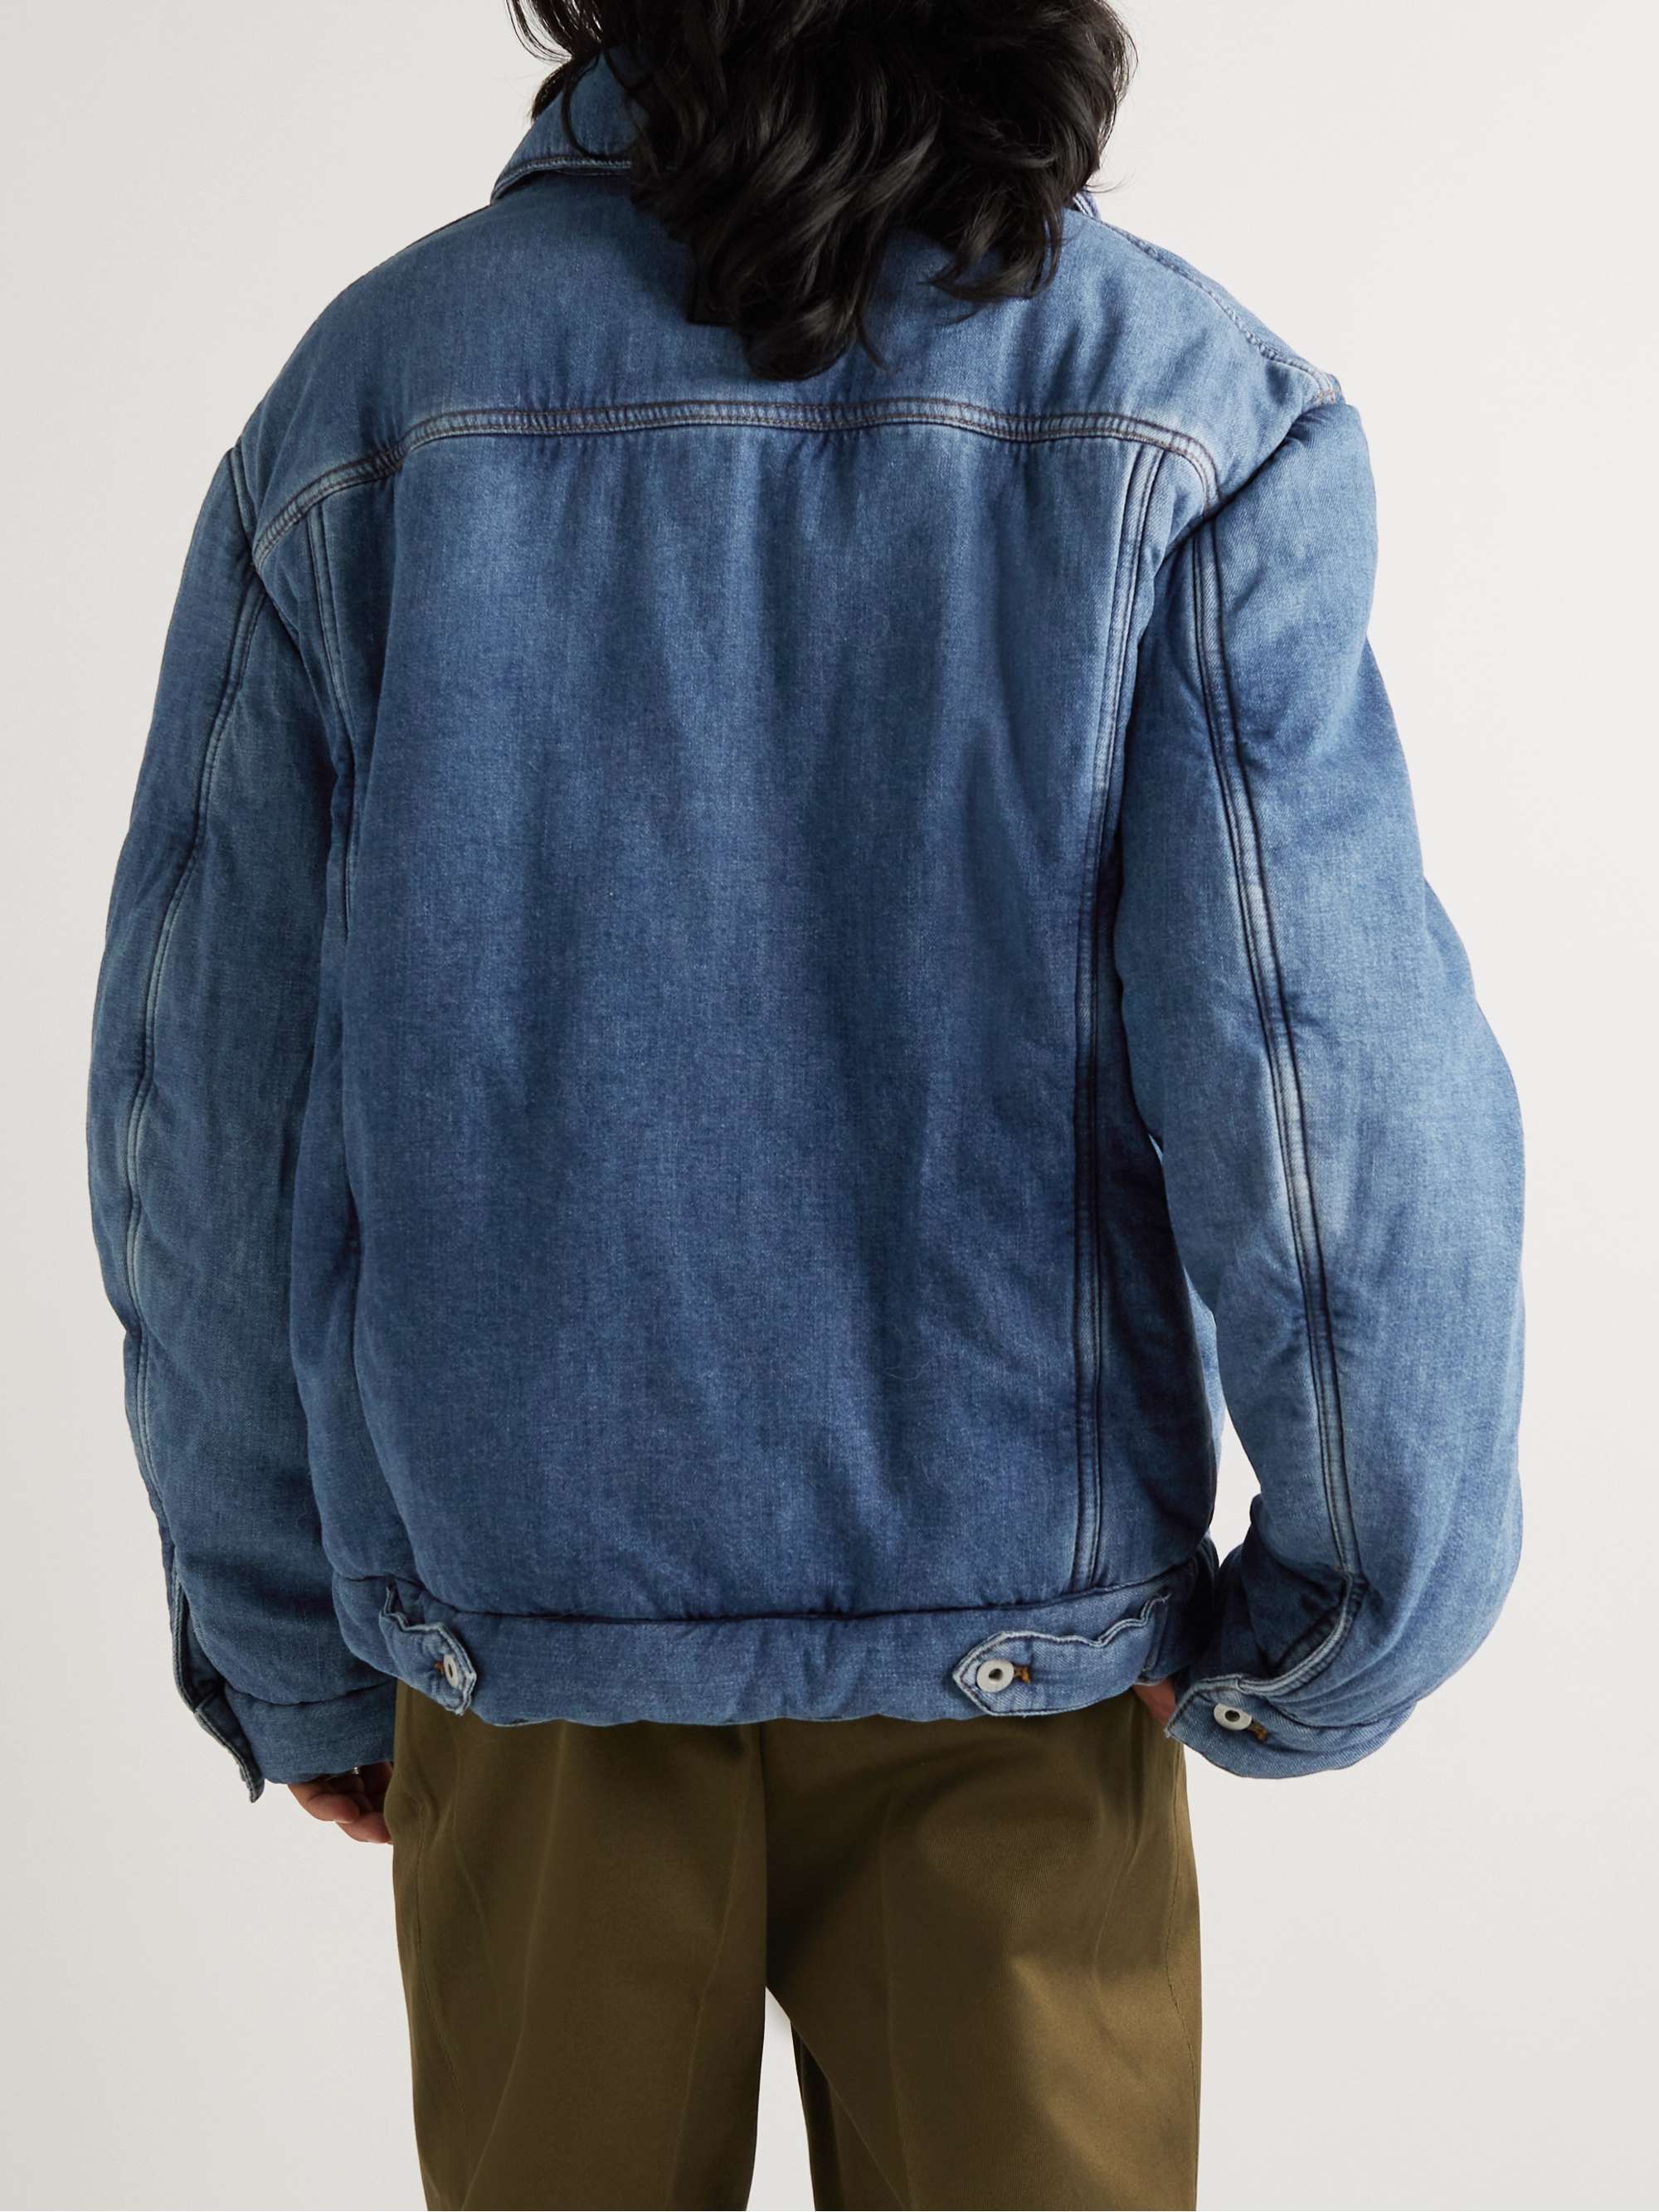 Levis Padded Denim Jacket | livewire.thewire.in